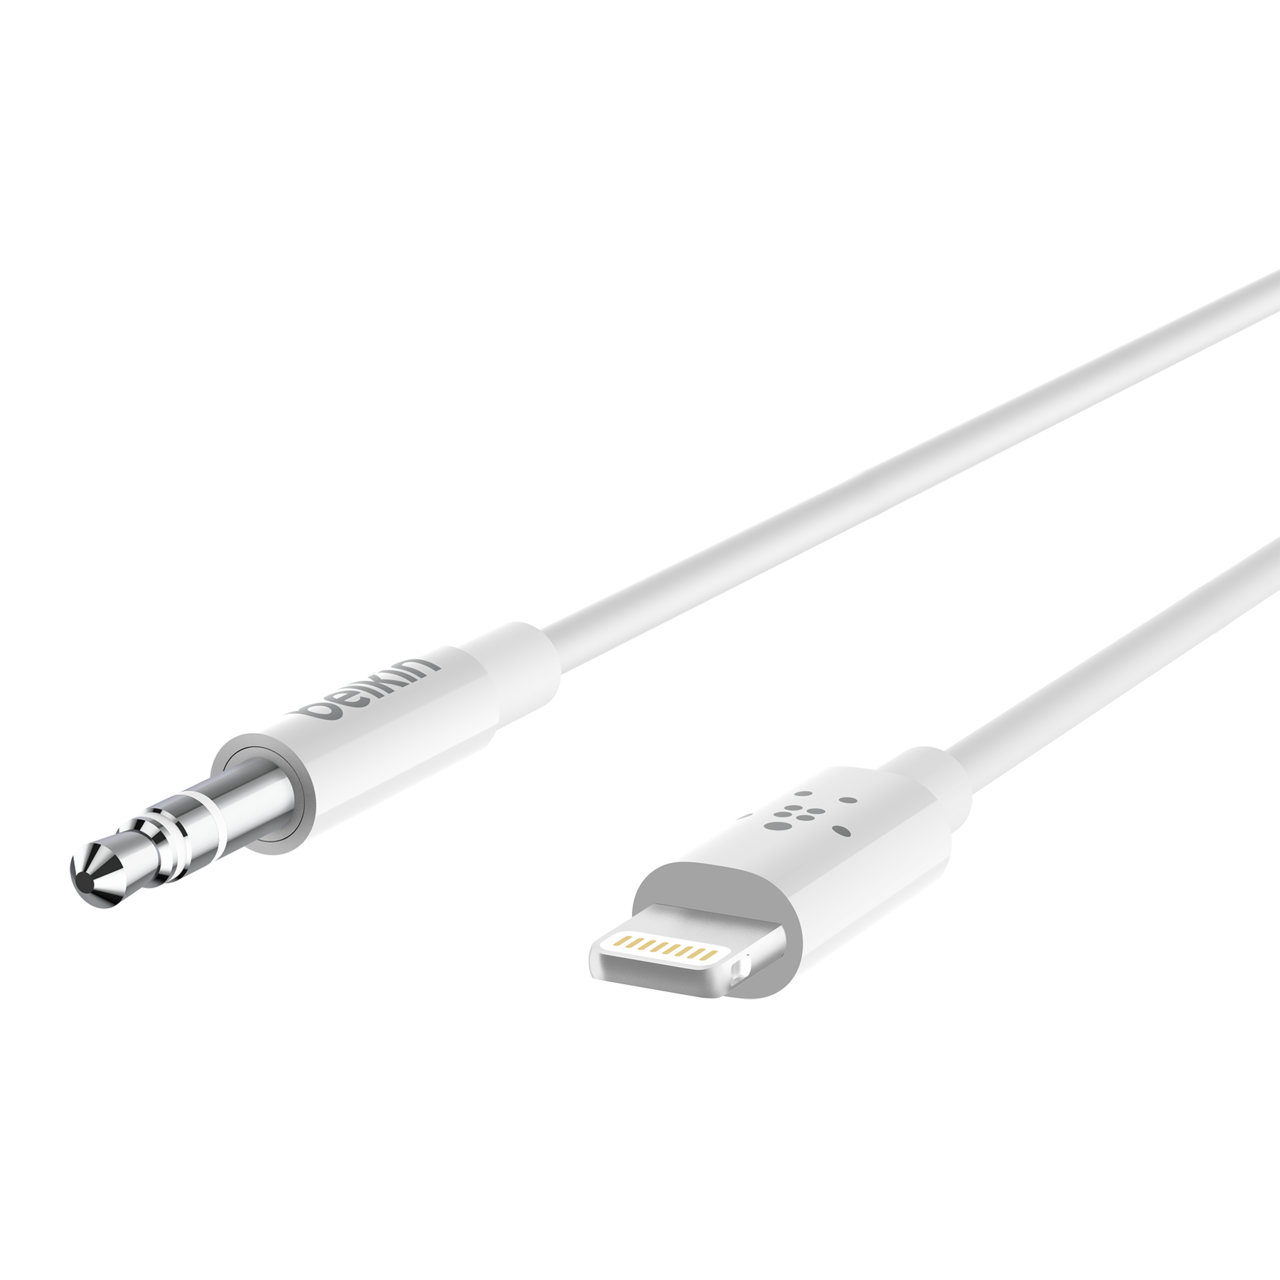 Belkin 3.5 mm Audio Cable With Lightning Connector in White